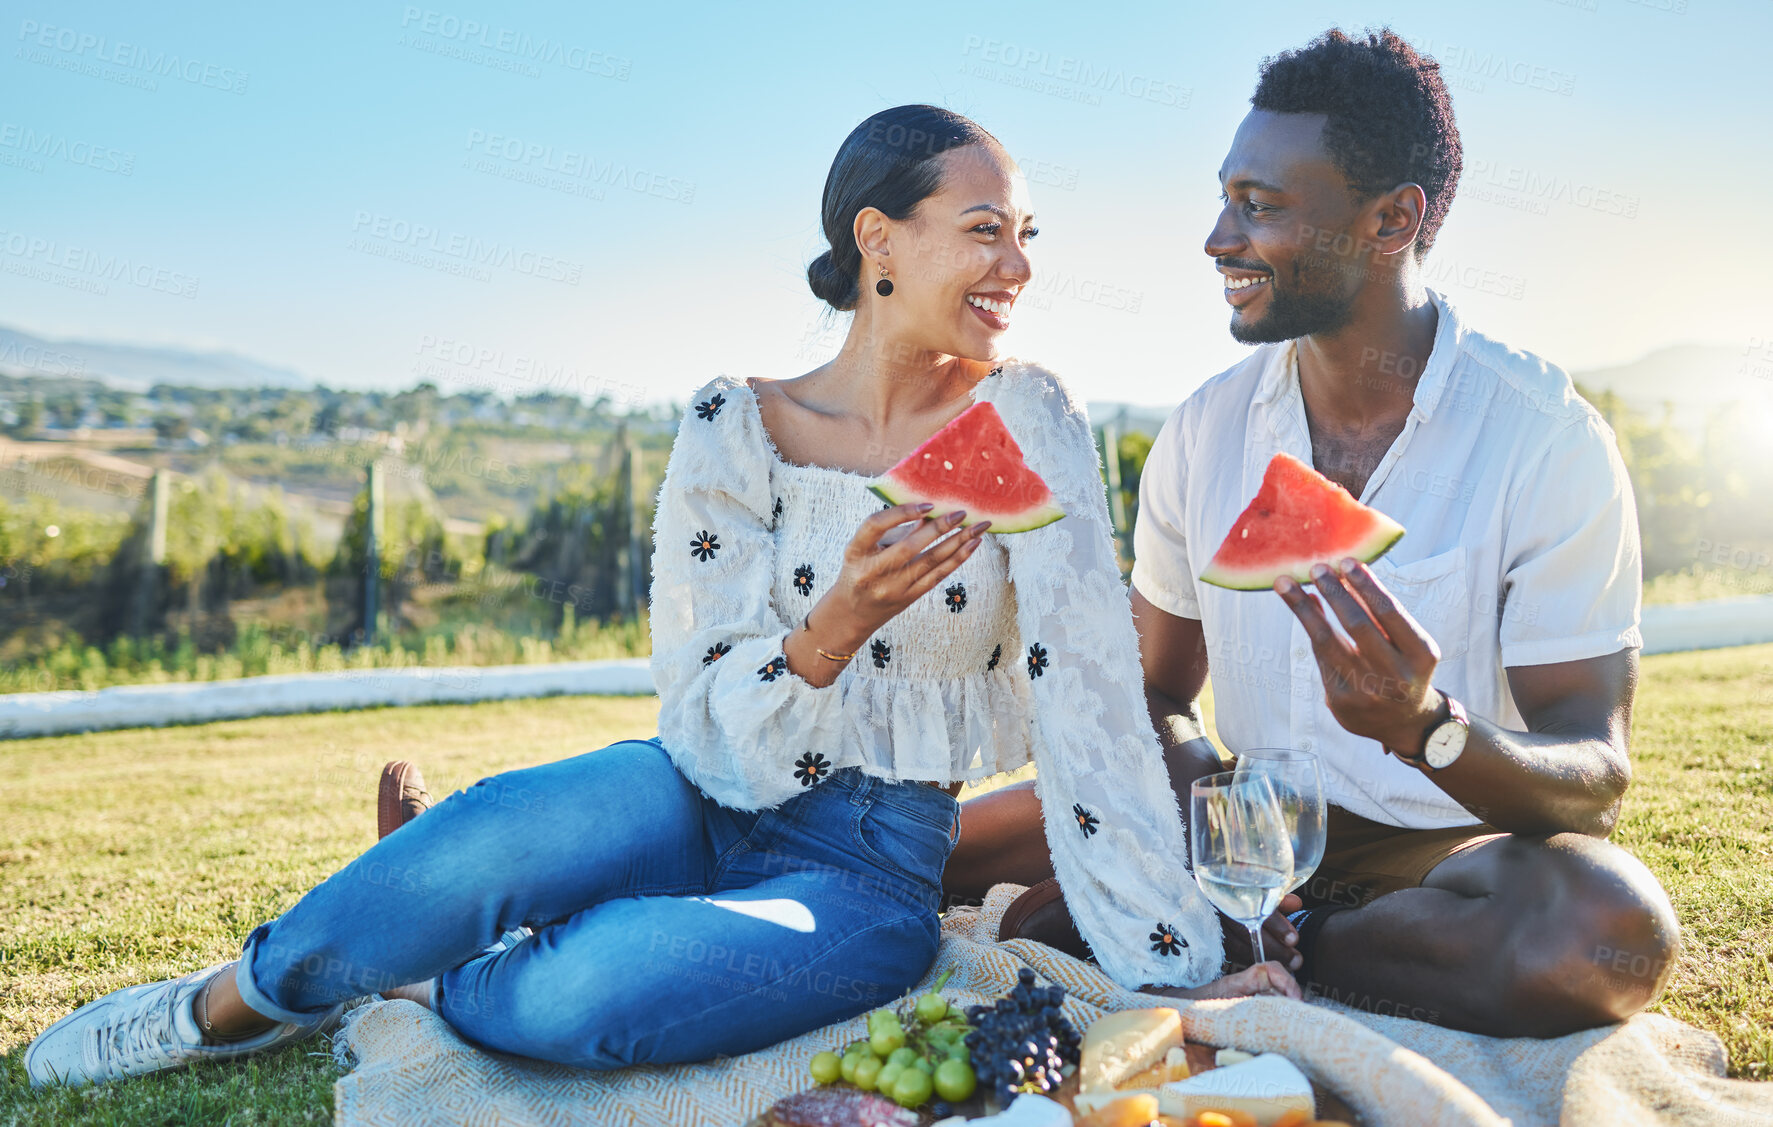 Buy stock photo Watermelon, love or black couple on a picnic to relax on a summer holiday vacation in nature or grass. Partnership, romance or happy black woman enjoys traveling or bonding with a funny black man 